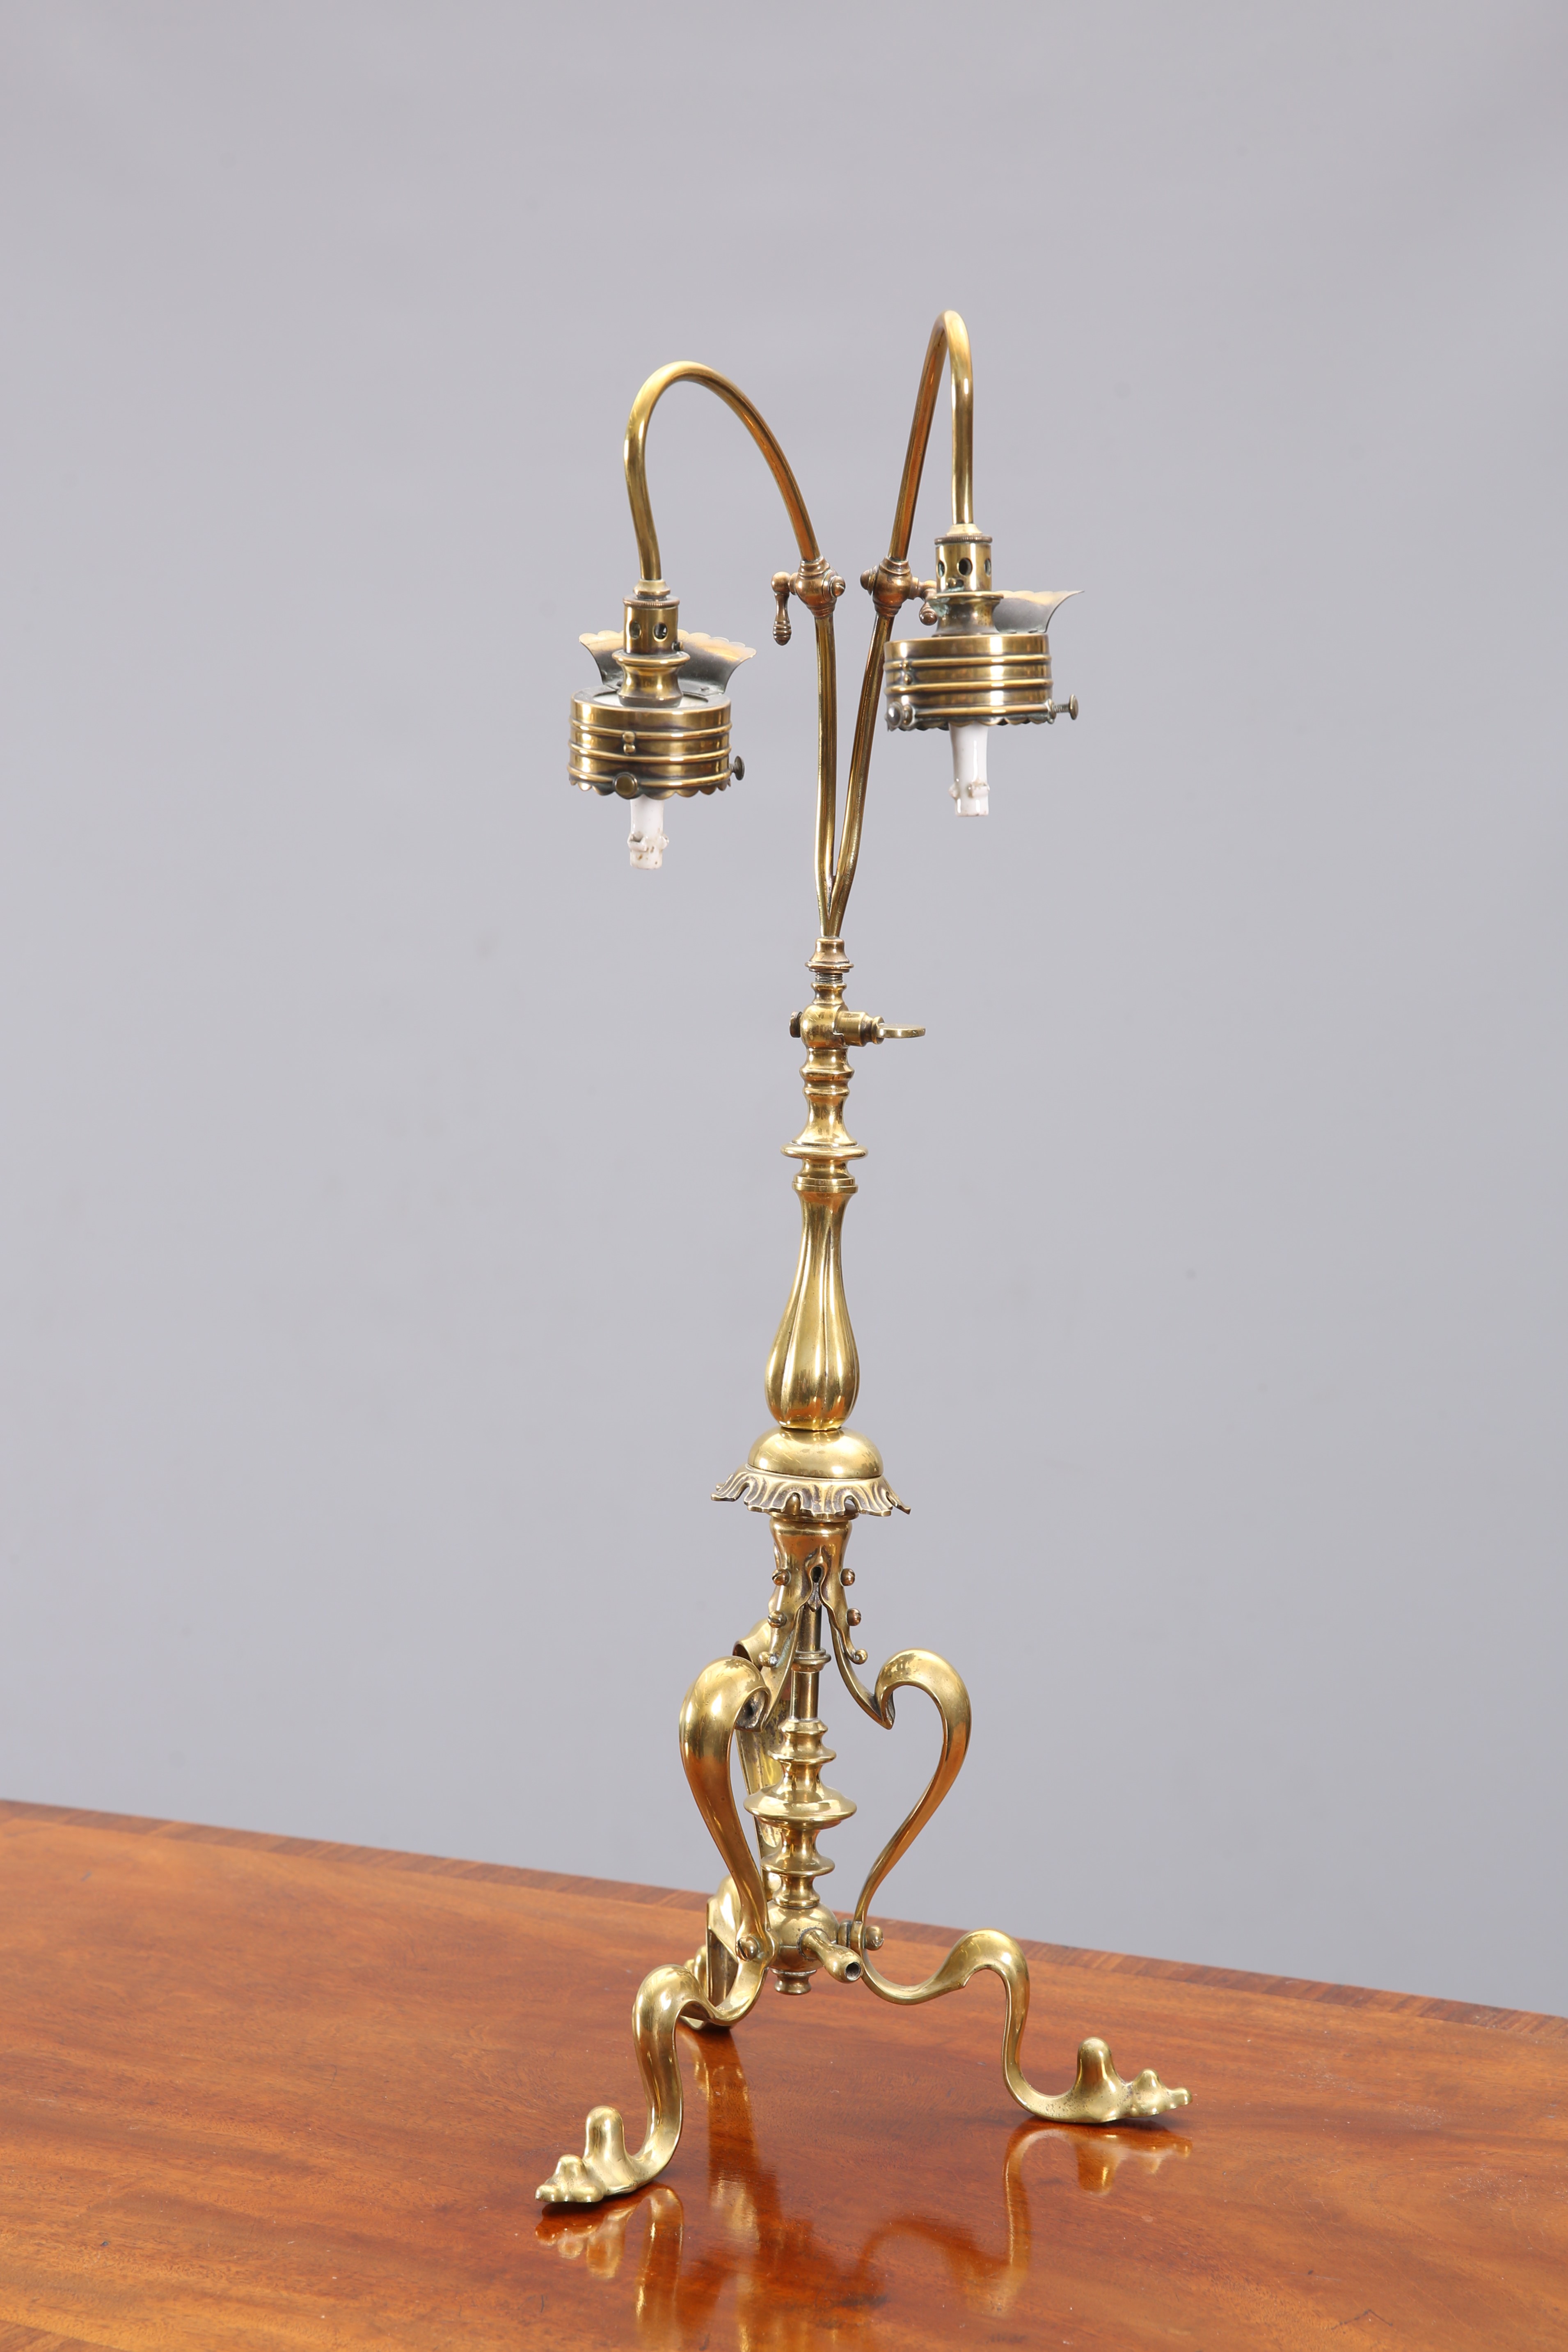 AN ARTS AND CRAFTS BRASS GASOLIER TABLE LAMP